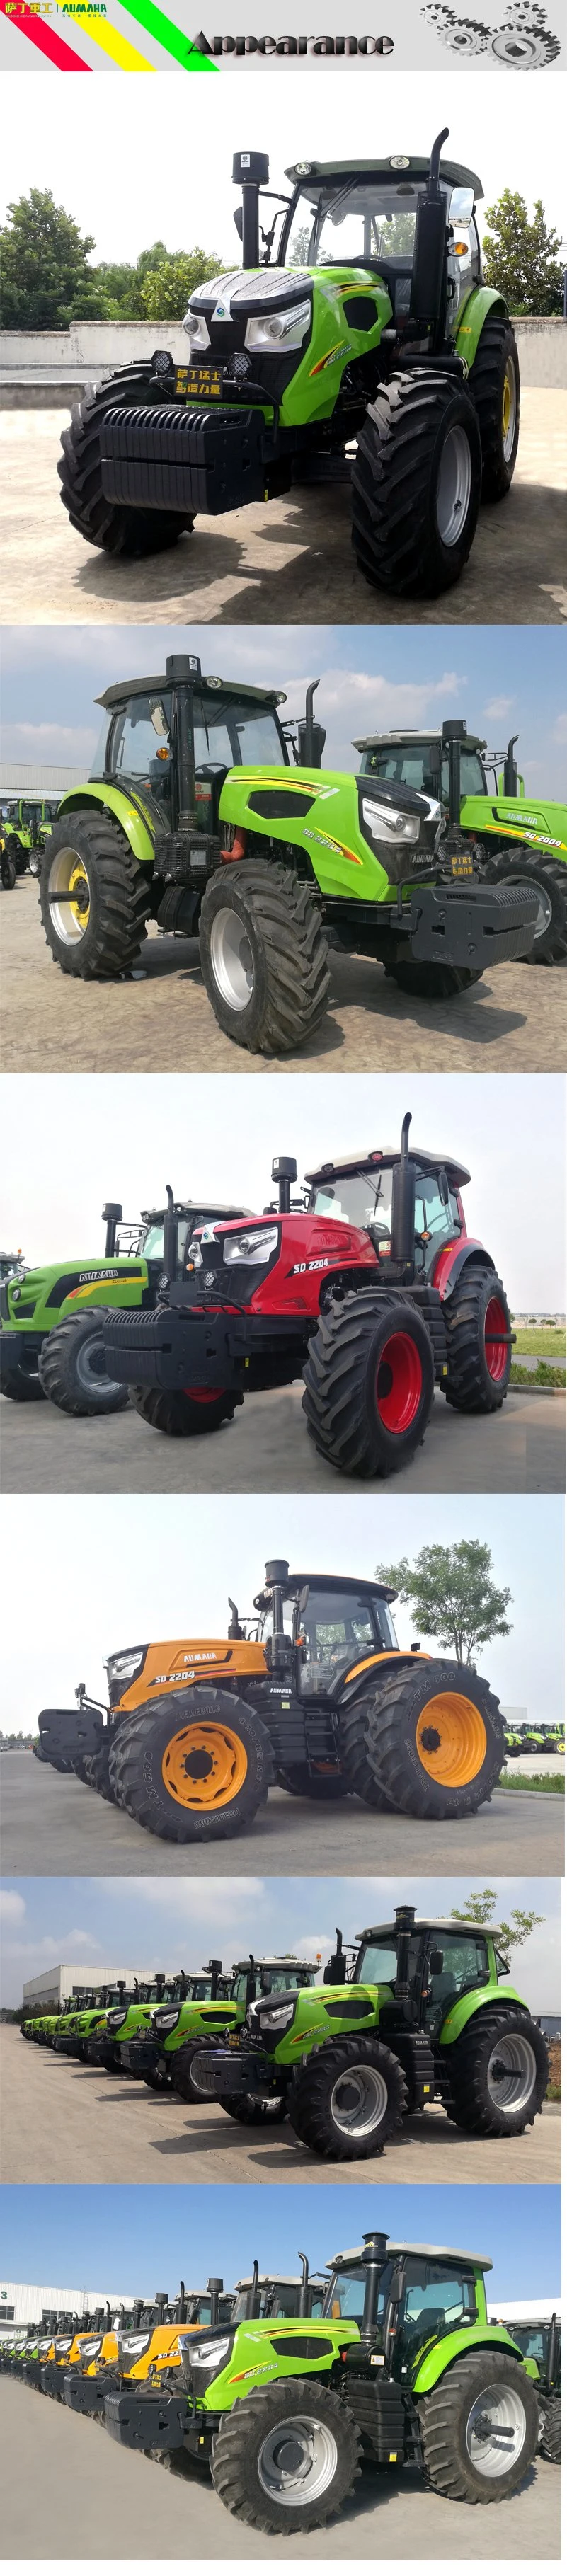 Sadin Large Power Tractor 200HP 220HP Farm/Agricultural Transportion Construction Tractor